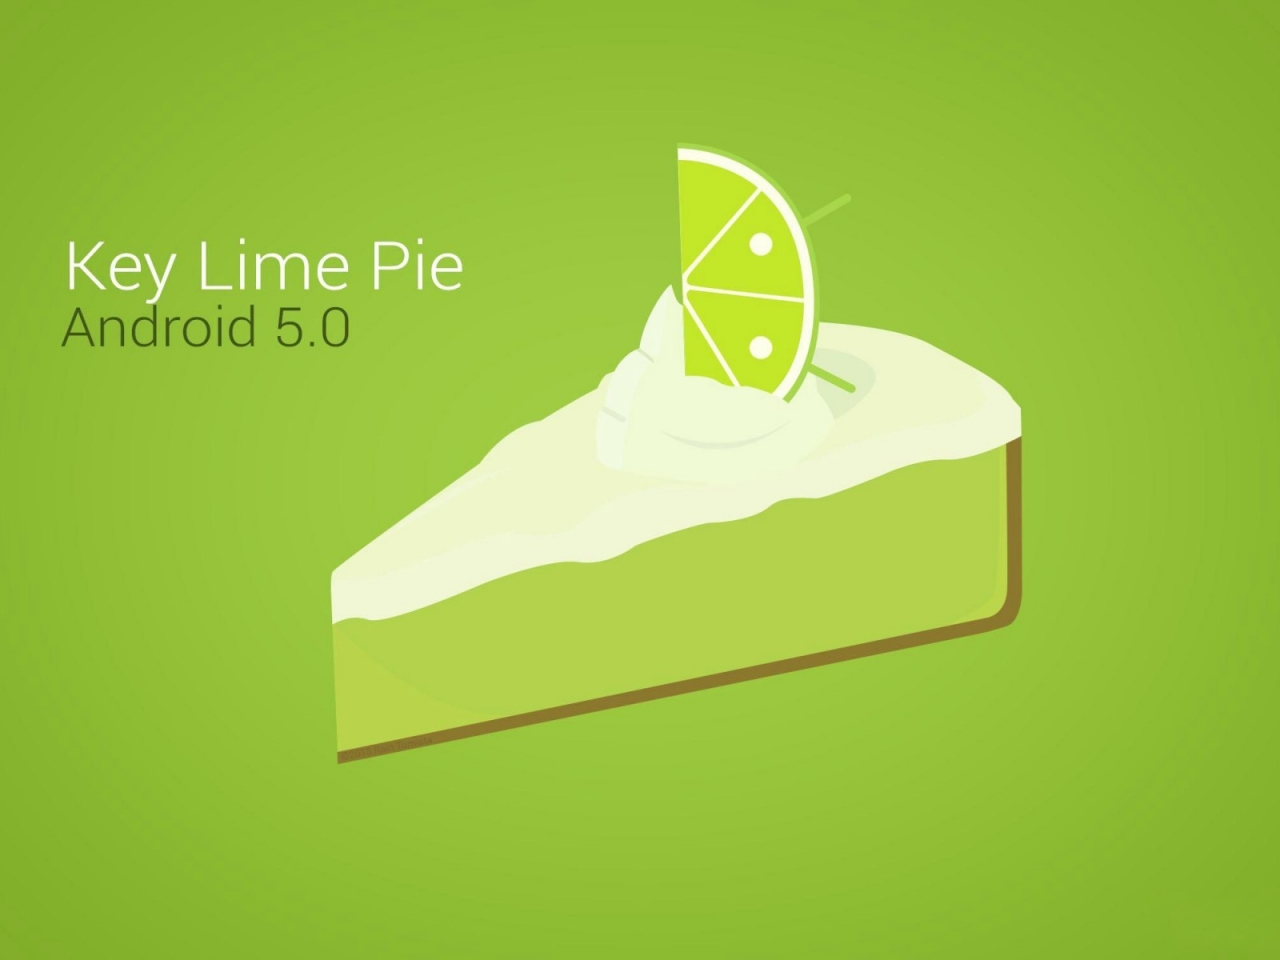 Android 5.0 for 1280 x 960 resolution